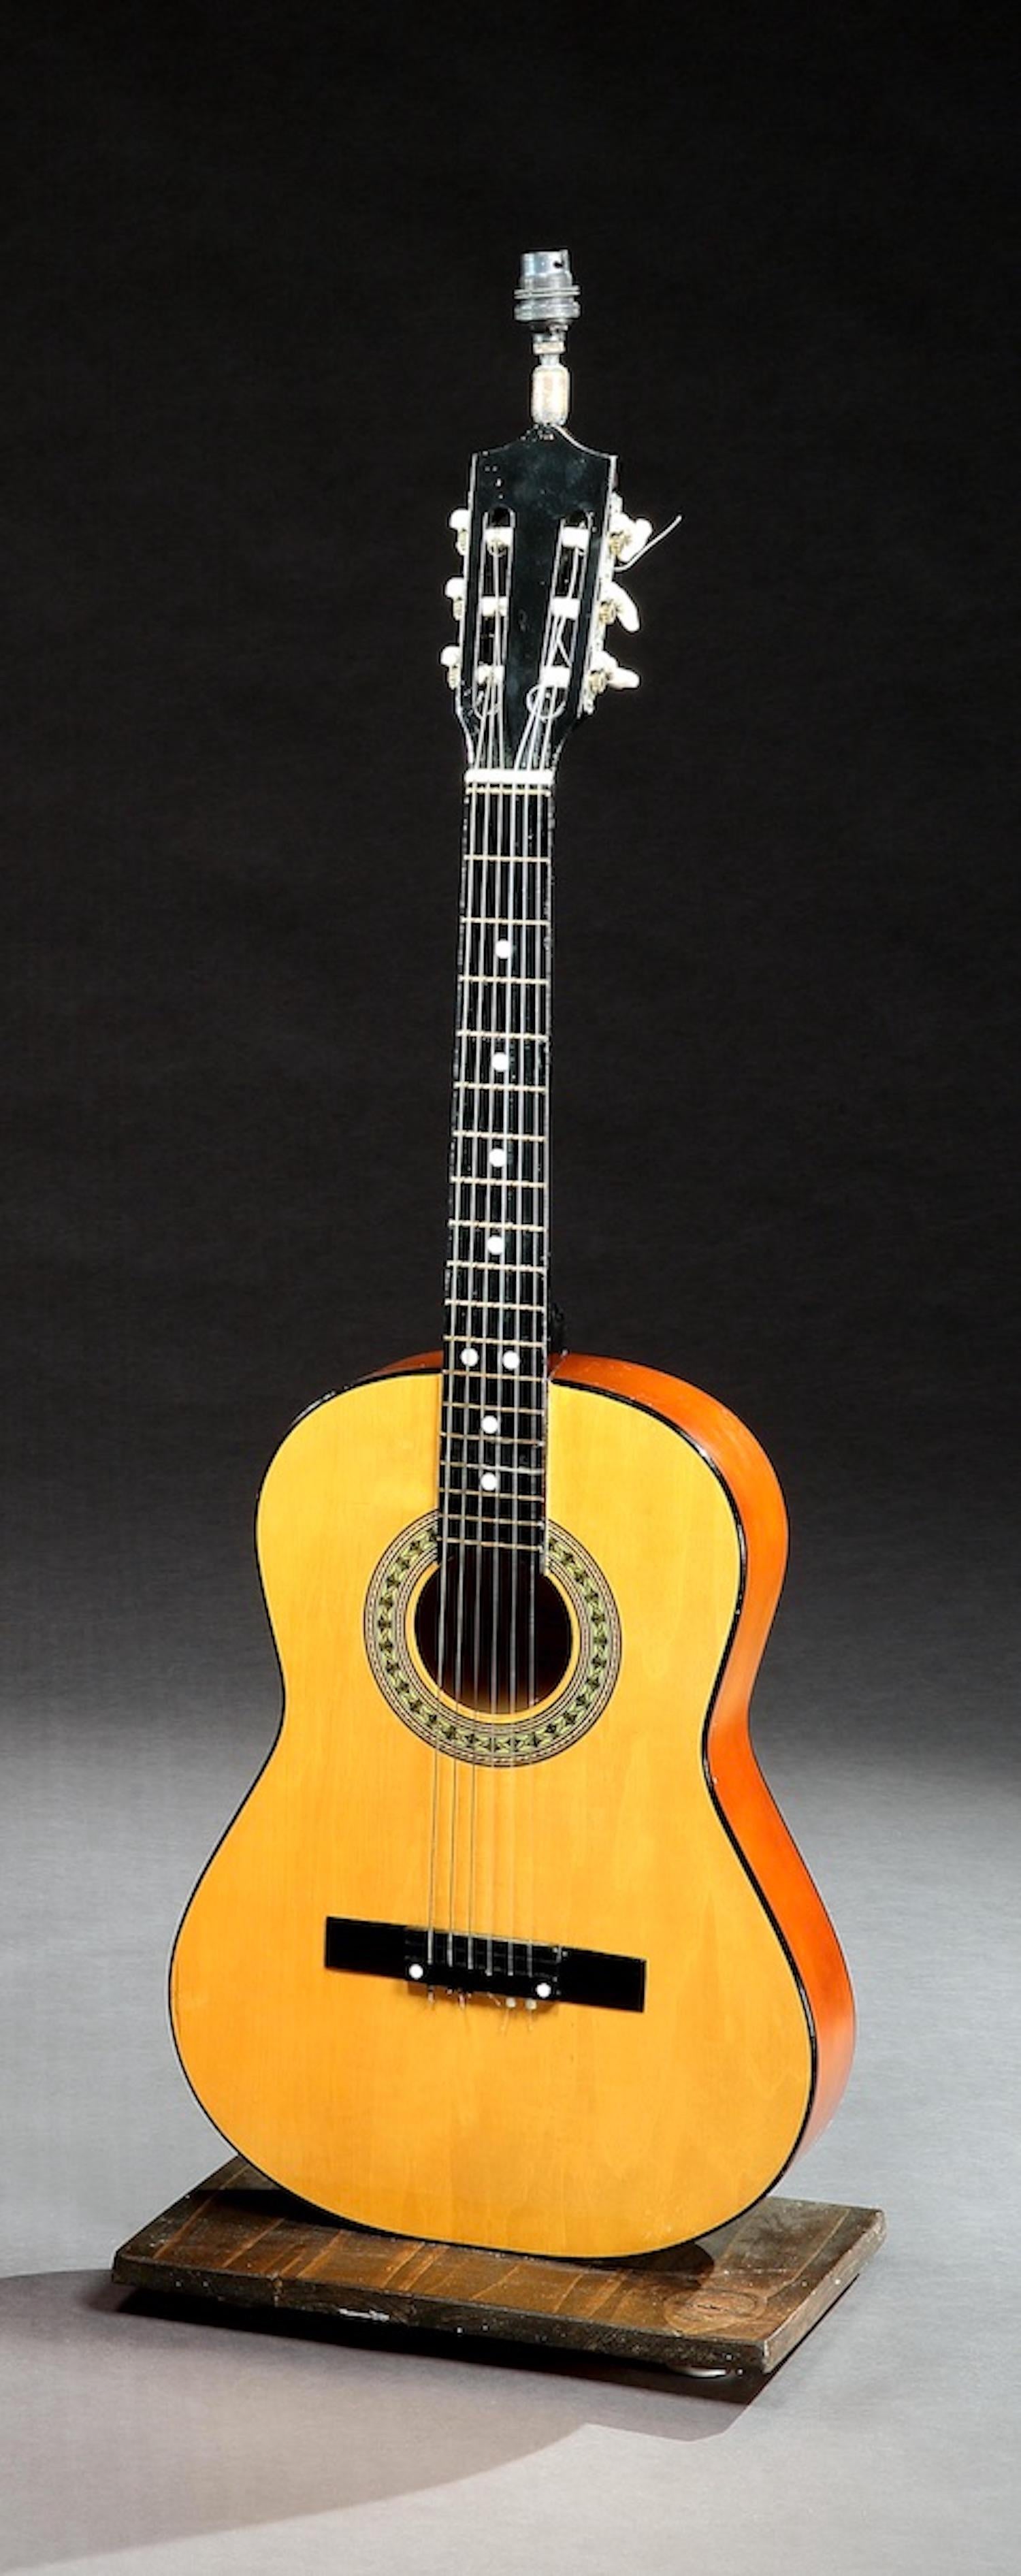 This three-quarter size classical, acoustic guitar is in a natural, two-tone wooden finish and has a vibrant, exciting tone.
 
Linden spruce laminate body, back, sides and neck. The body with Classic rosette decoration. Binding black front. Bridge